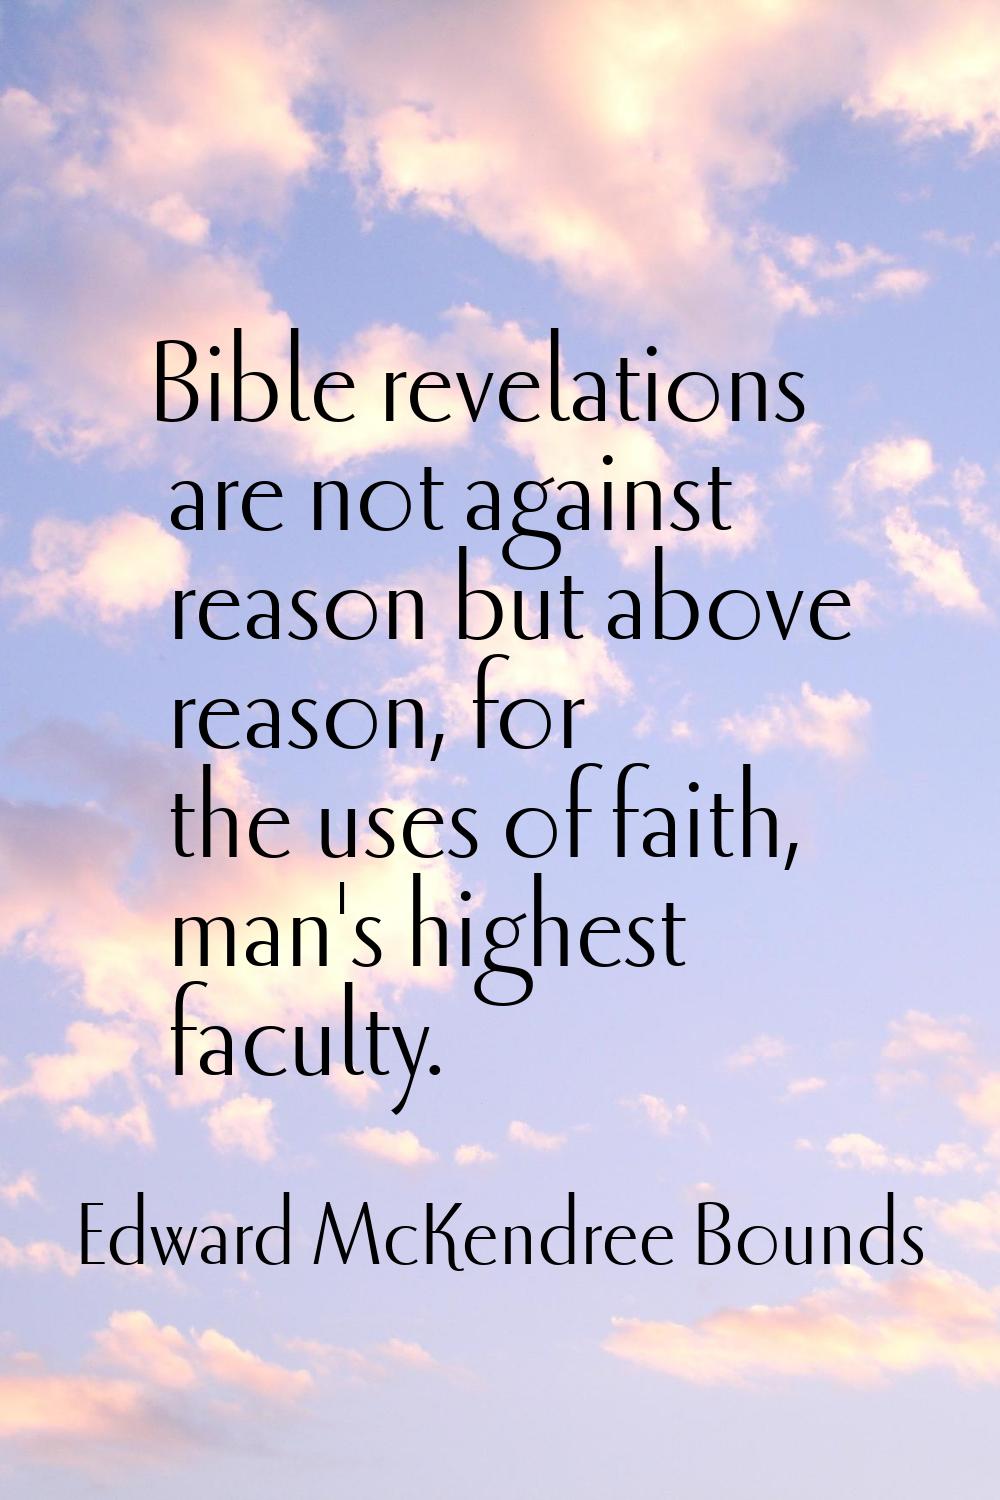 Bible revelations are not against reason but above reason, for the uses of faith, man's highest fac